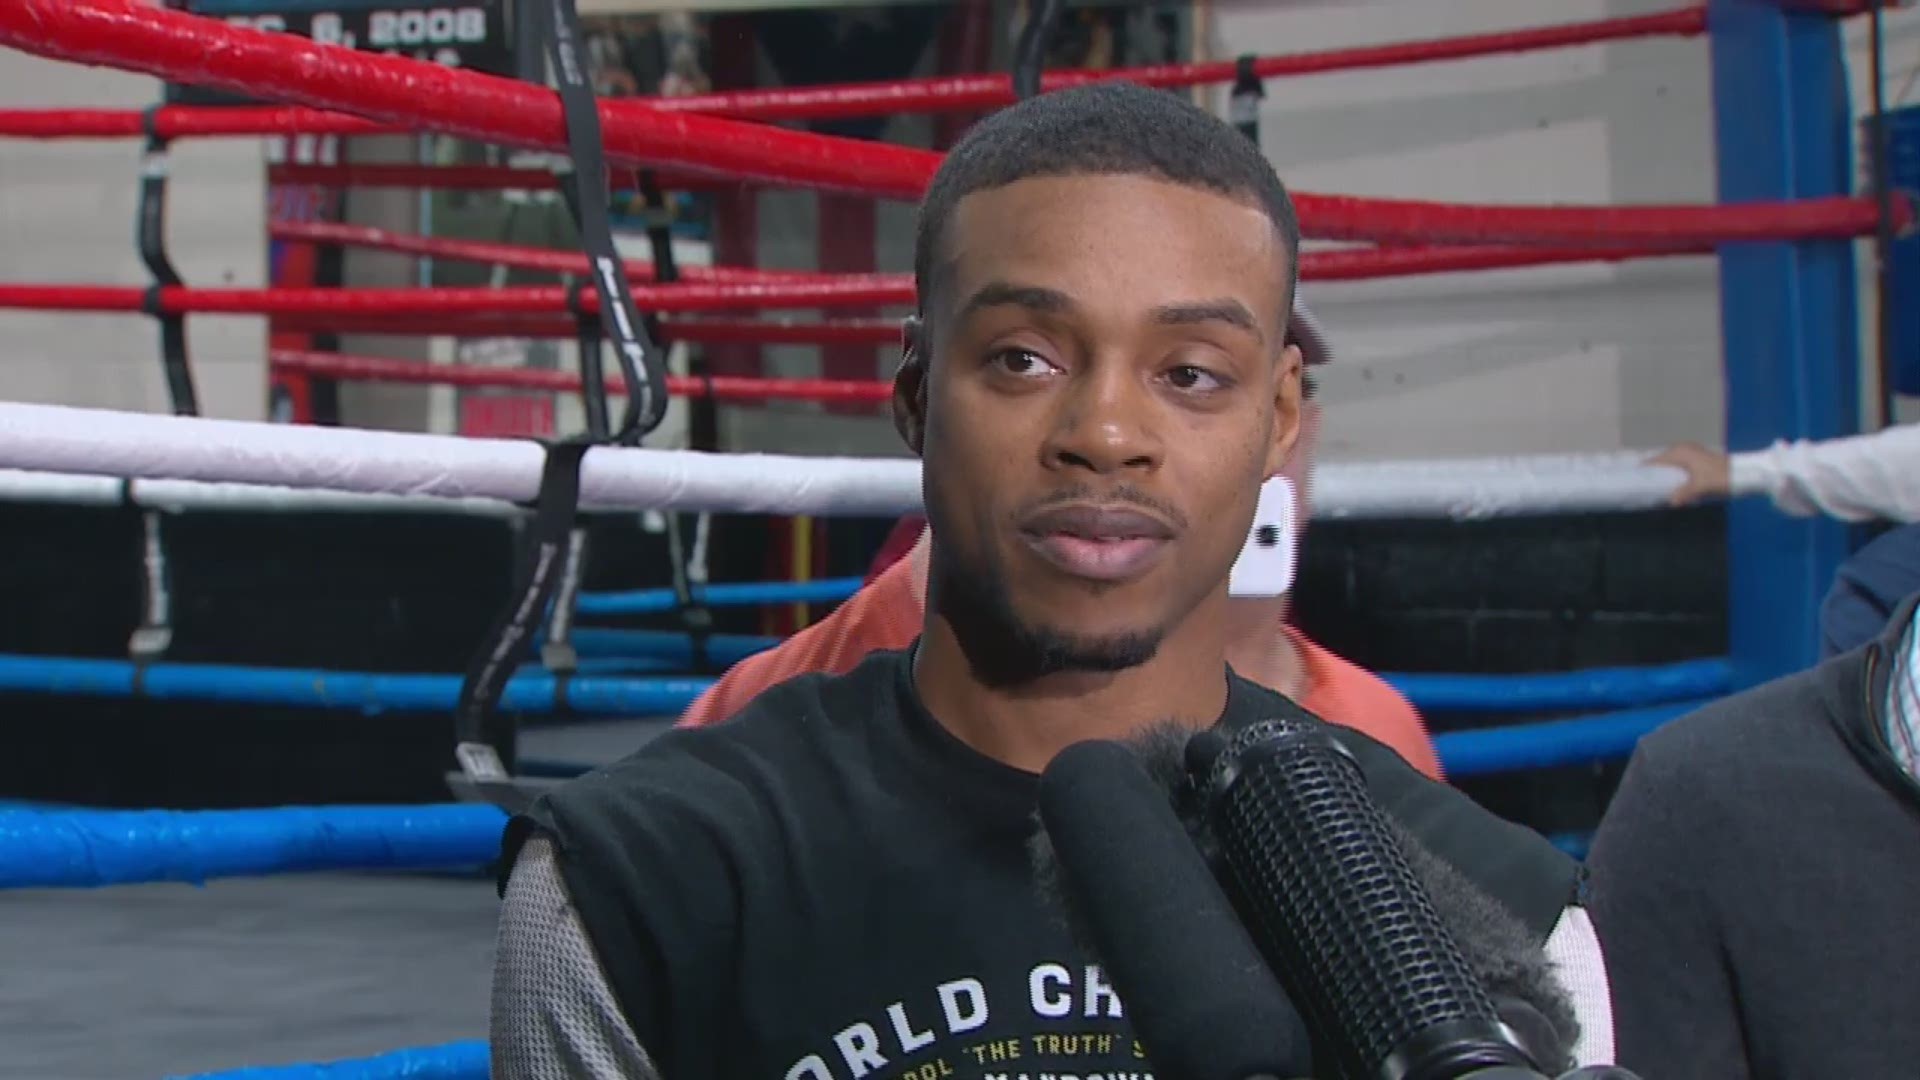 Desoto product Errol Spence, Jr. fights Lamont Peterson on January 20th, to defend his IBF Welterweight title